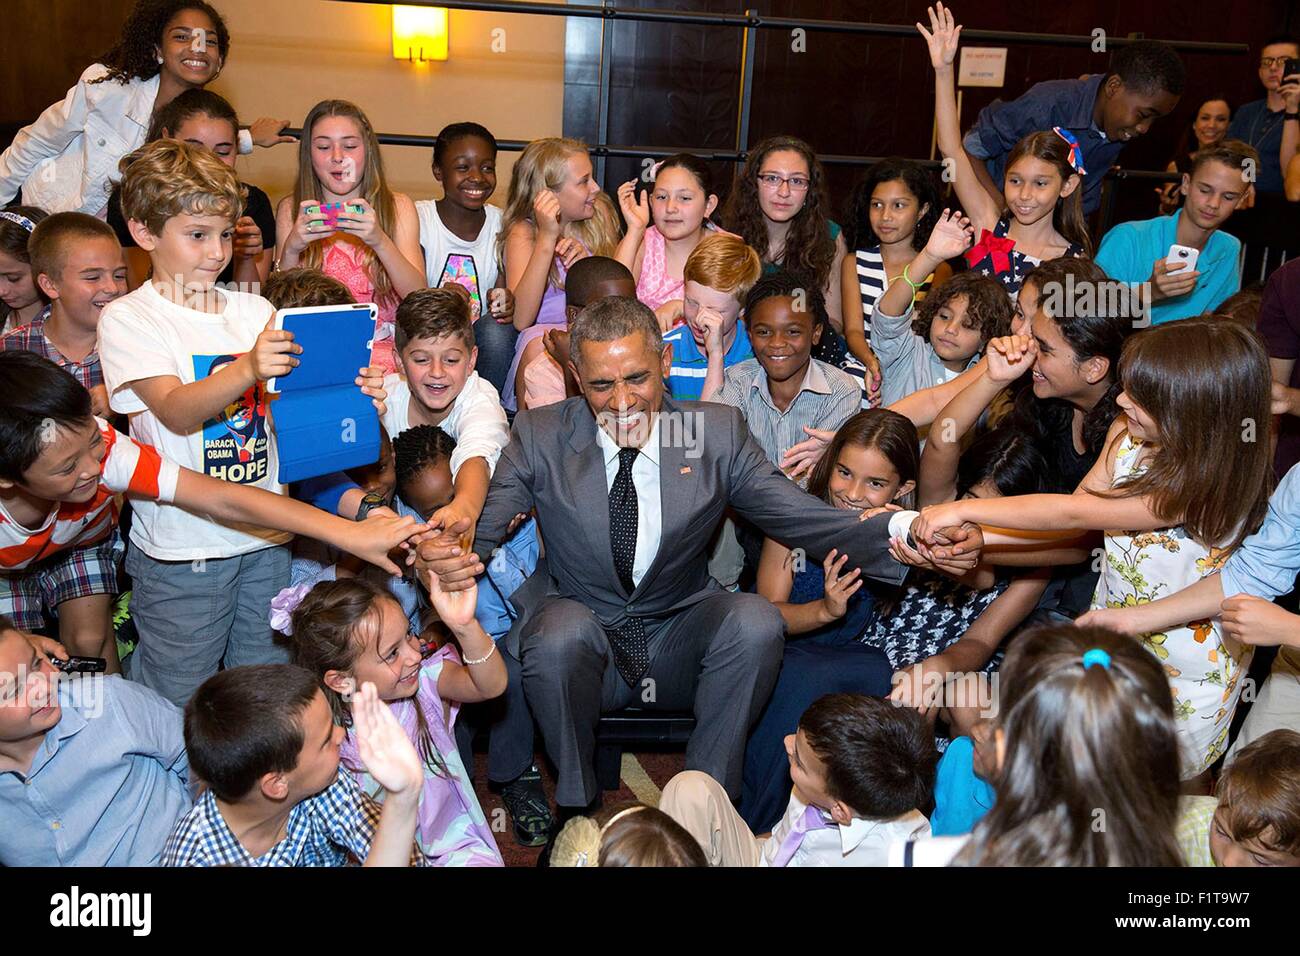 U.S. President Barack Obama has help from a group of school children getting up after a group photo during a U.S. Embassy meet and greet April 9, 2015 in Panama City, Panama. Stock Photo